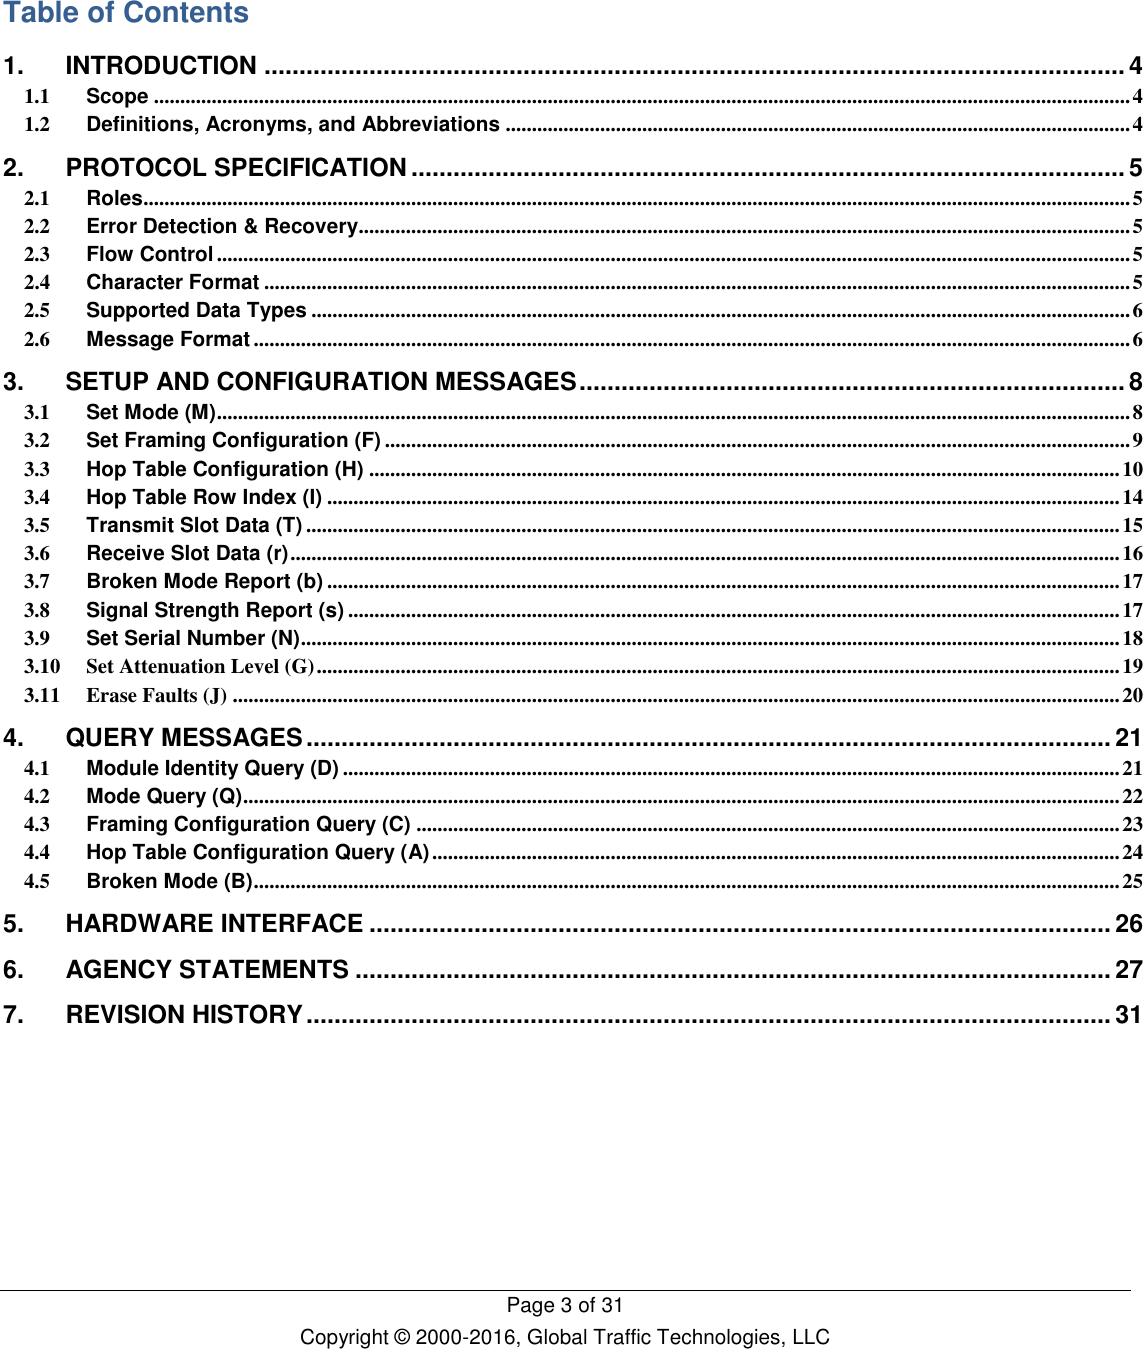   Page 3 of 31 Copyright © 2000-2016, Global Traffic Technologies, LLC   Table of Contents 1. INTRODUCTION ........................................................................................................................... 4 1.1 Scope .......................................................................................................................................................................................... 4 1.2 Definitions, Acronyms, and Abbreviations ....................................................................................................................... 4 2. PROTOCOL SPECIFICATION ...................................................................................................... 5 2.1 Roles ............................................................................................................................................................................................ 5 2.2 Error Detection &amp; Recovery................................................................................................................................................... 5 2.3 Flow Control .............................................................................................................................................................................. 5 2.4 Character Format ..................................................................................................................................................................... 5 2.5 Supported Data Types ............................................................................................................................................................ 6 2.6 Message Format ....................................................................................................................................................................... 6 3. SETUP AND CONFIGURATION MESSAGES .............................................................................. 8 3.1 Set Mode (M) .............................................................................................................................................................................. 8 3.2 Set Framing Configuration (F) .............................................................................................................................................. 9 3.3 Hop Table Configuration (H) ............................................................................................................................................... 10 3.4 Hop Table Row Index (I) ....................................................................................................................................................... 14 3.5 Transmit Slot Data (T) ........................................................................................................................................................... 15 3.6 Receive Slot Data (r) .............................................................................................................................................................. 16 3.7 Broken Mode Report (b) ....................................................................................................................................................... 17 3.8 Signal Strength Report (s) ................................................................................................................................................... 17 3.9 Set Serial Number (N) ............................................................................................................................................................ 18 3.10 Set Attenuation Level (G) ......................................................................................................................................................... 19 3.11 Erase Faults (J) ......................................................................................................................................................................... 20 4. QUERY MESSAGES ................................................................................................................... 21 4.1 Module Identity Query (D) .................................................................................................................................................... 21 4.2 Mode Query (Q) ....................................................................................................................................................................... 22 4.3 Framing Configuration Query (C) ...................................................................................................................................... 23 4.4 Hop Table Configuration Query (A) ................................................................................................................................... 24 4.5 Broken Mode (B) ..................................................................................................................................................................... 25 5. HARDWARE INTERFACE .......................................................................................................... 26 6. AGENCY STATEMENTS ............................................................................................................ 27 7. REVISION HISTORY ................................................................................................................... 31           